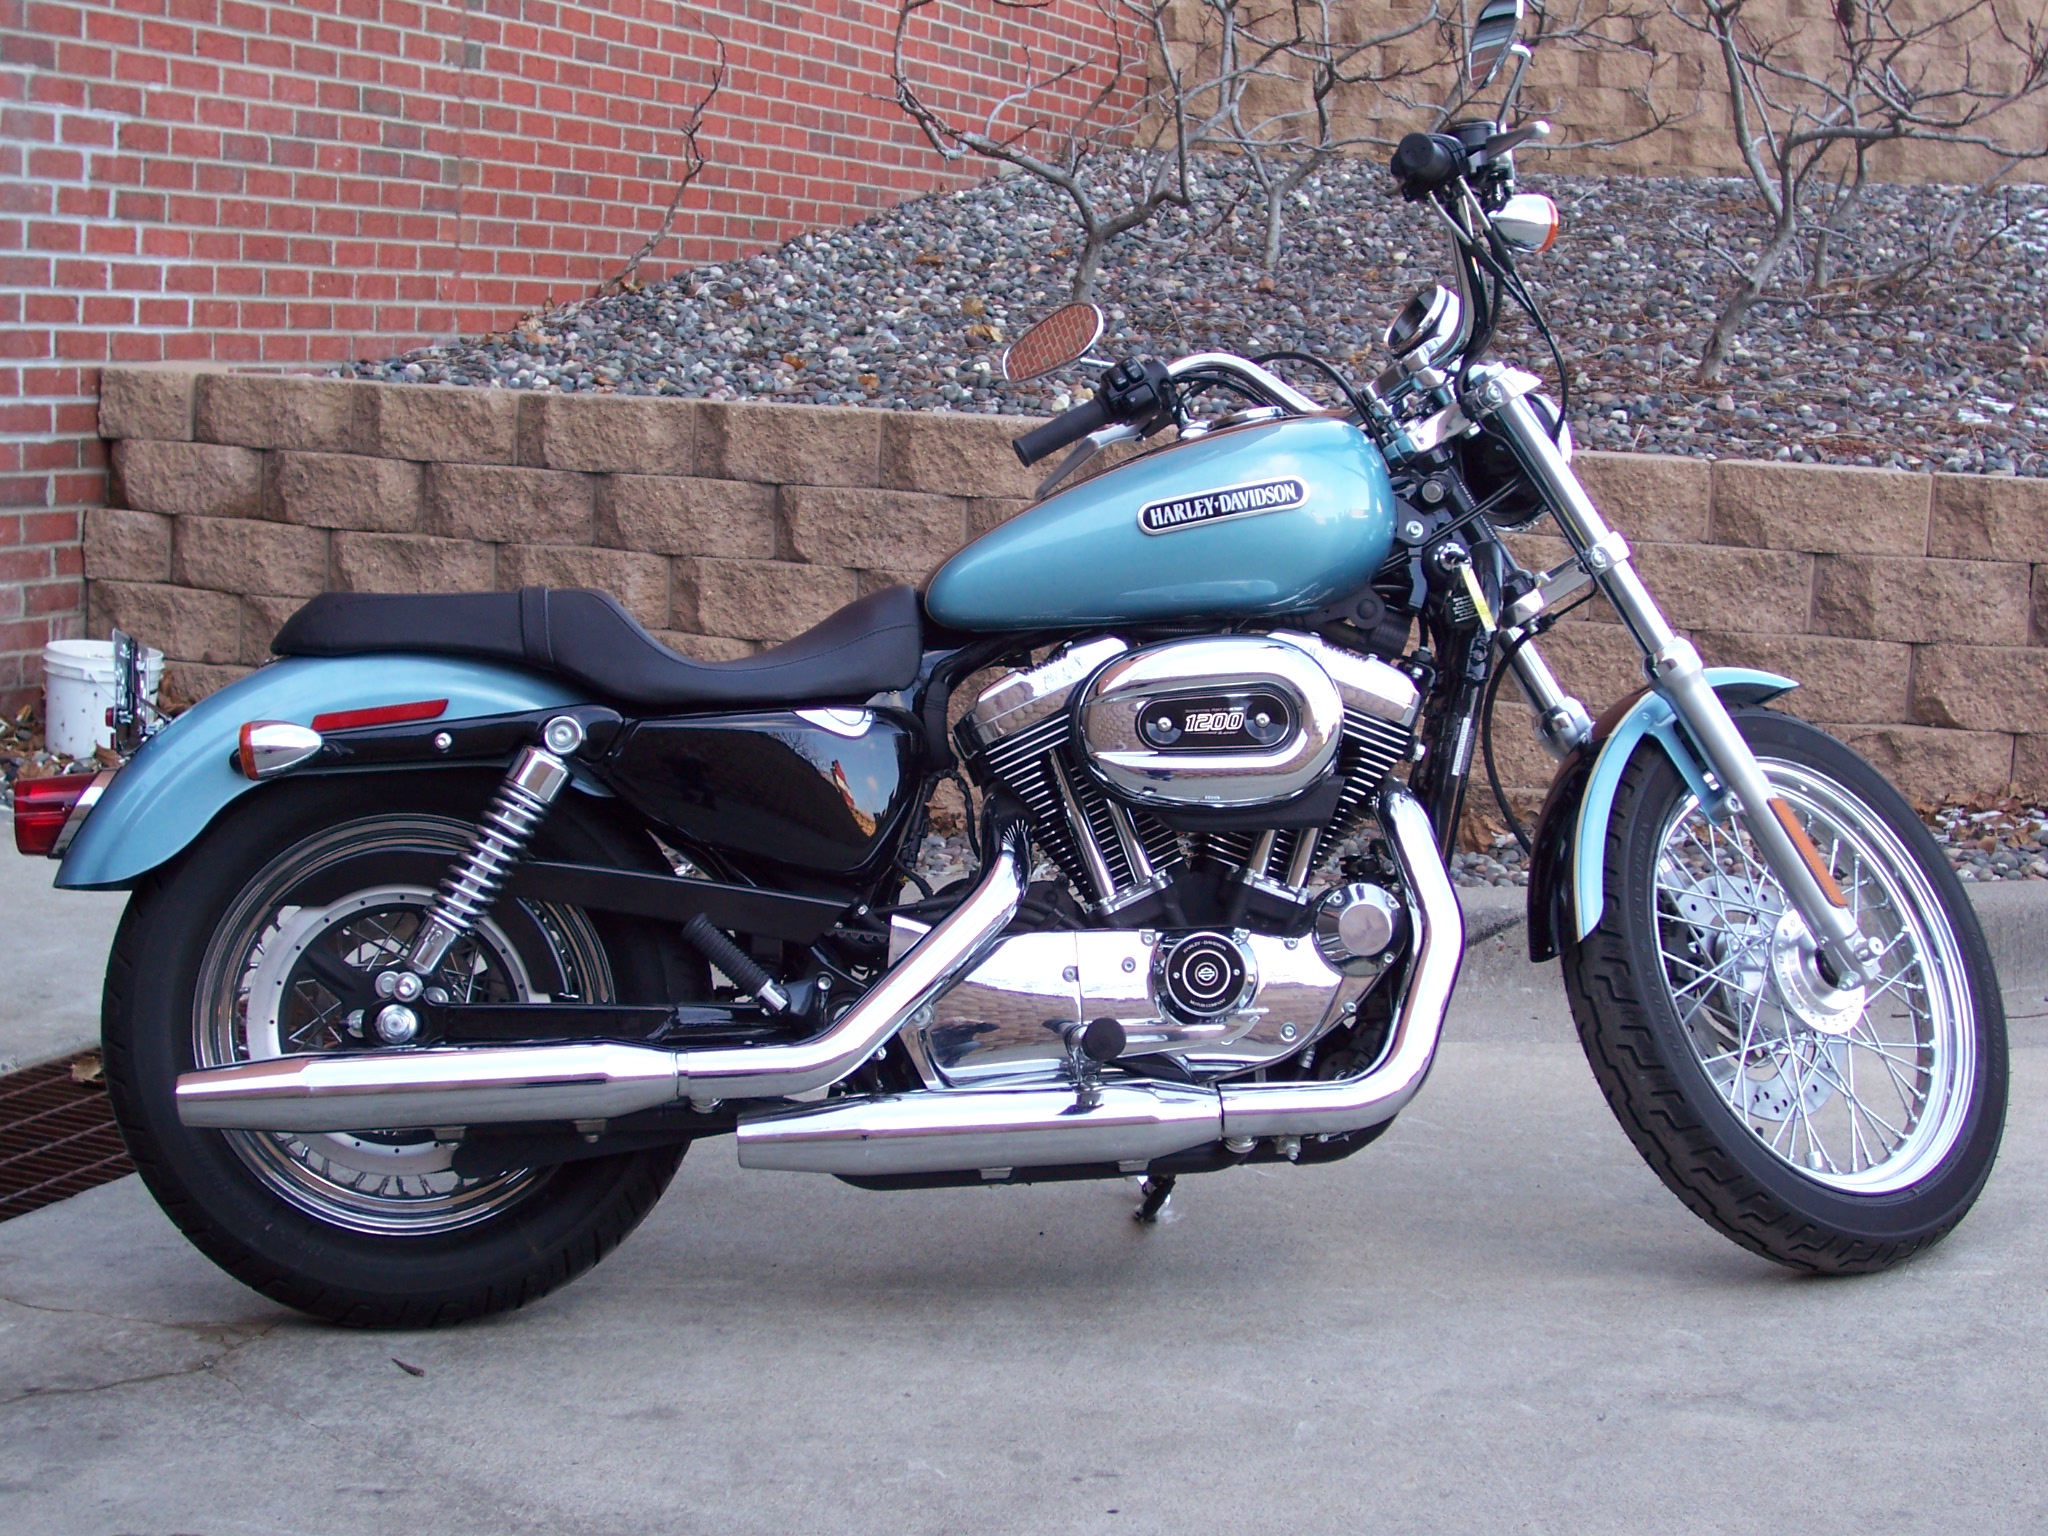 Here are a few bikes I've looked at! Opinions welcomed. 2007 Harley Davidson 1200 Sportster